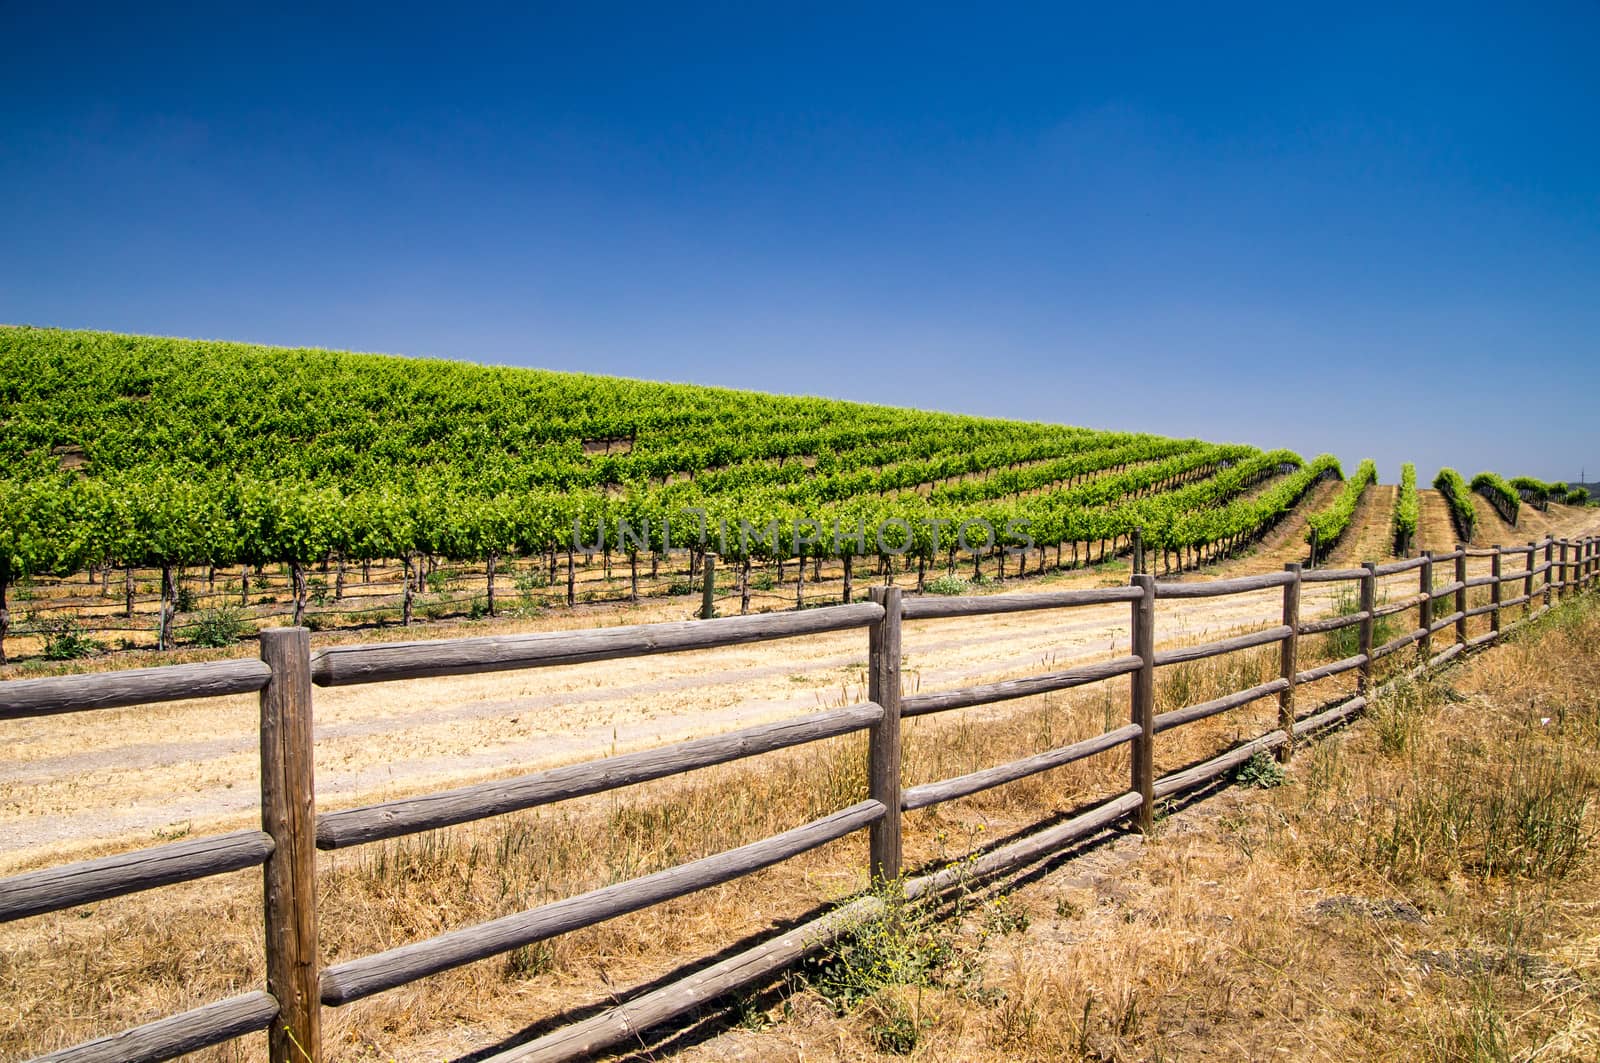 Grapevines of California by emattil